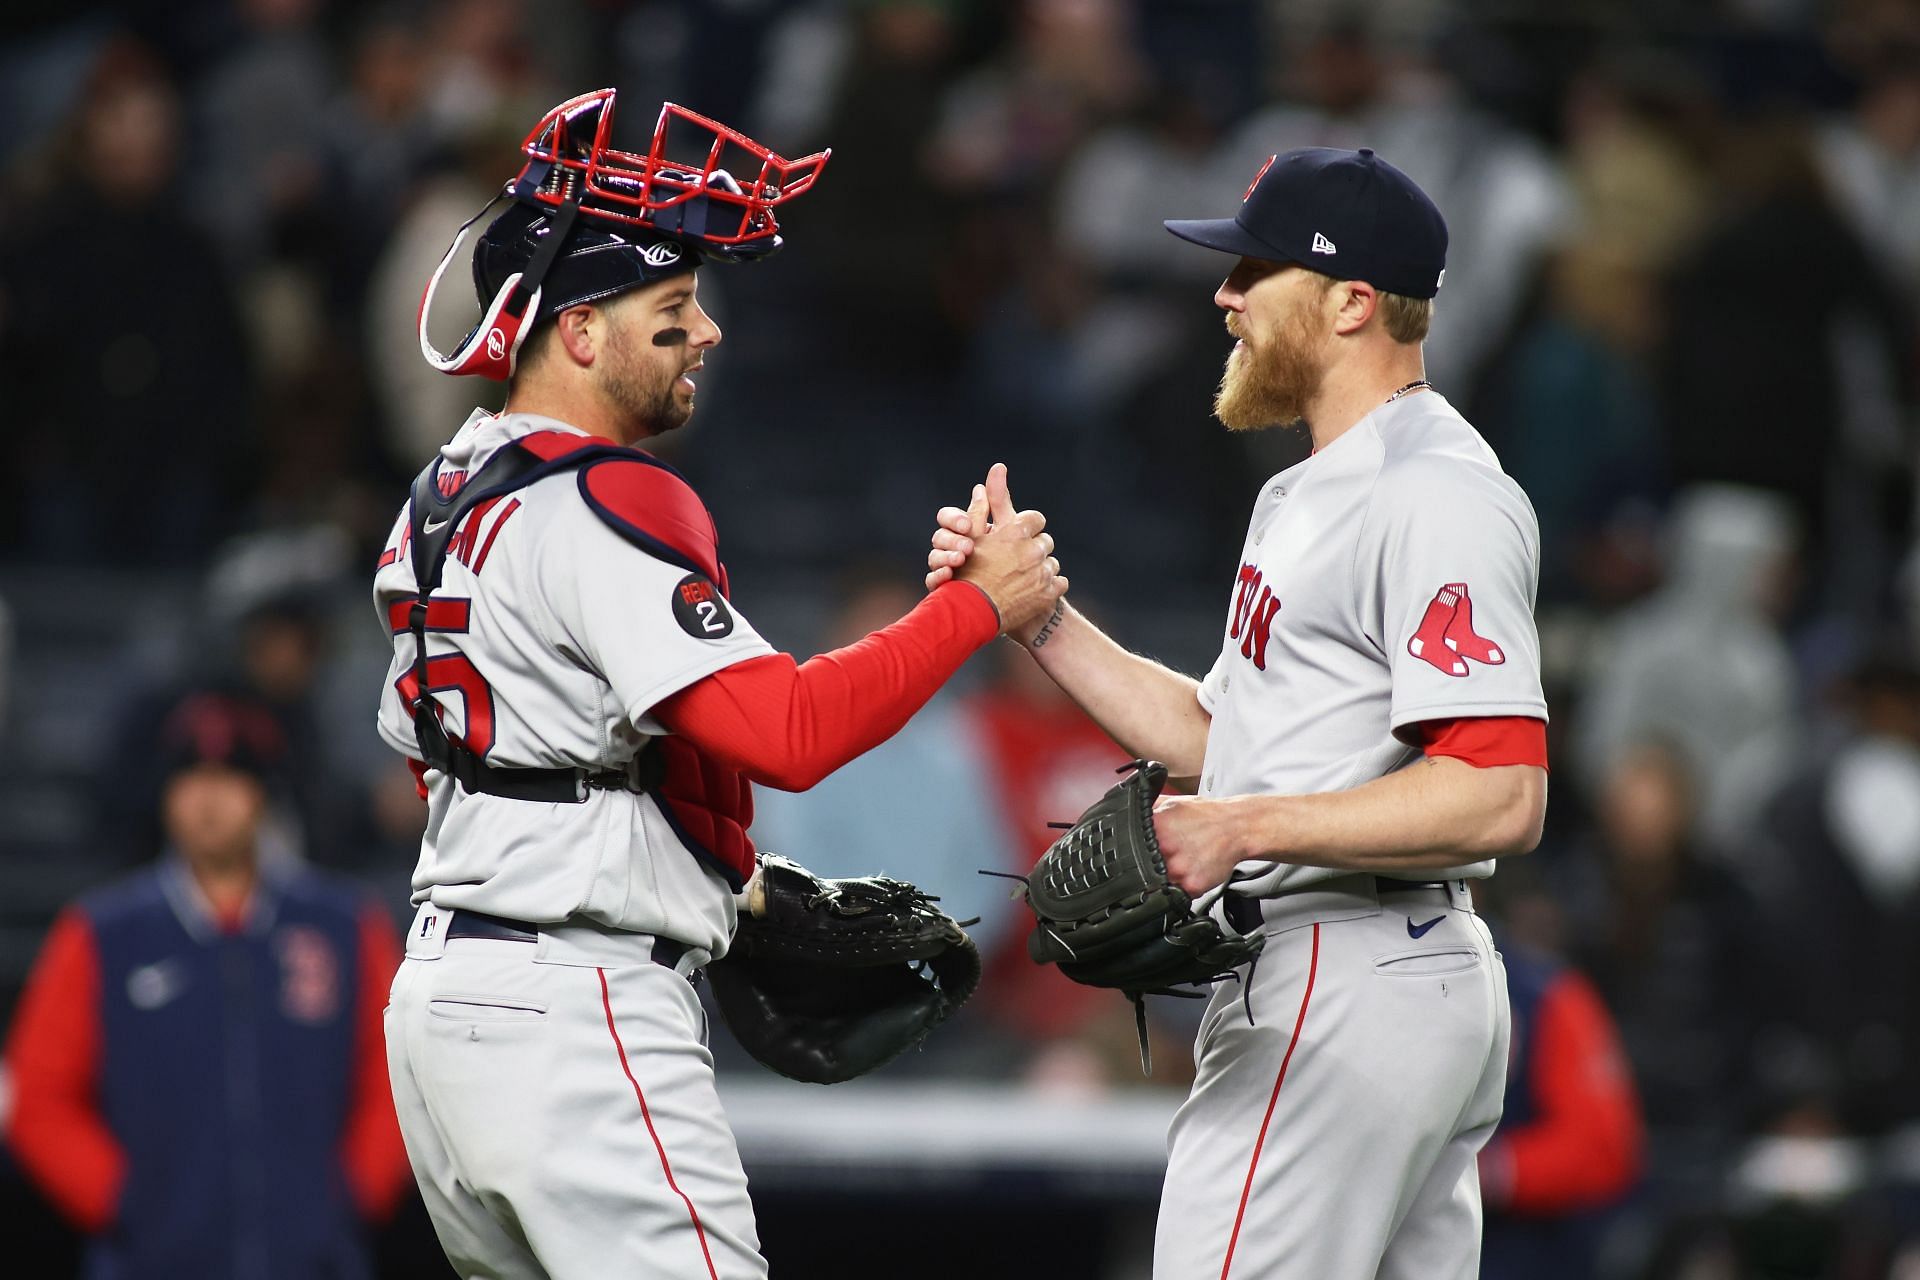 RP Jake Diekman has looked sharp for the Boston Red Sox so far